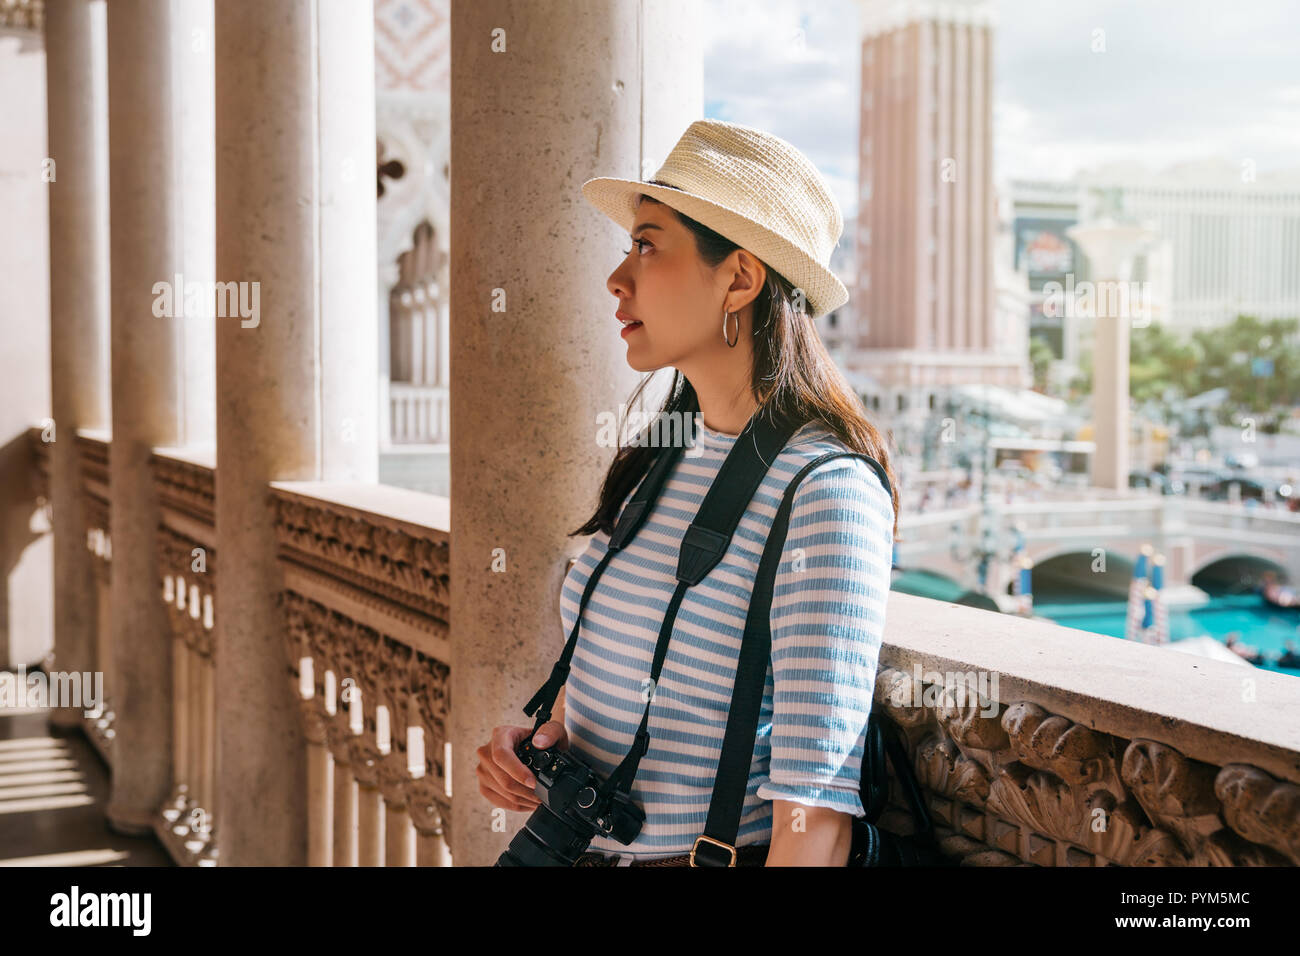 female tourist standing in the corridor in classic design building. young traveler relaxing seeing the amazing beautiful ceiling.   lady photographer  Stock Photo